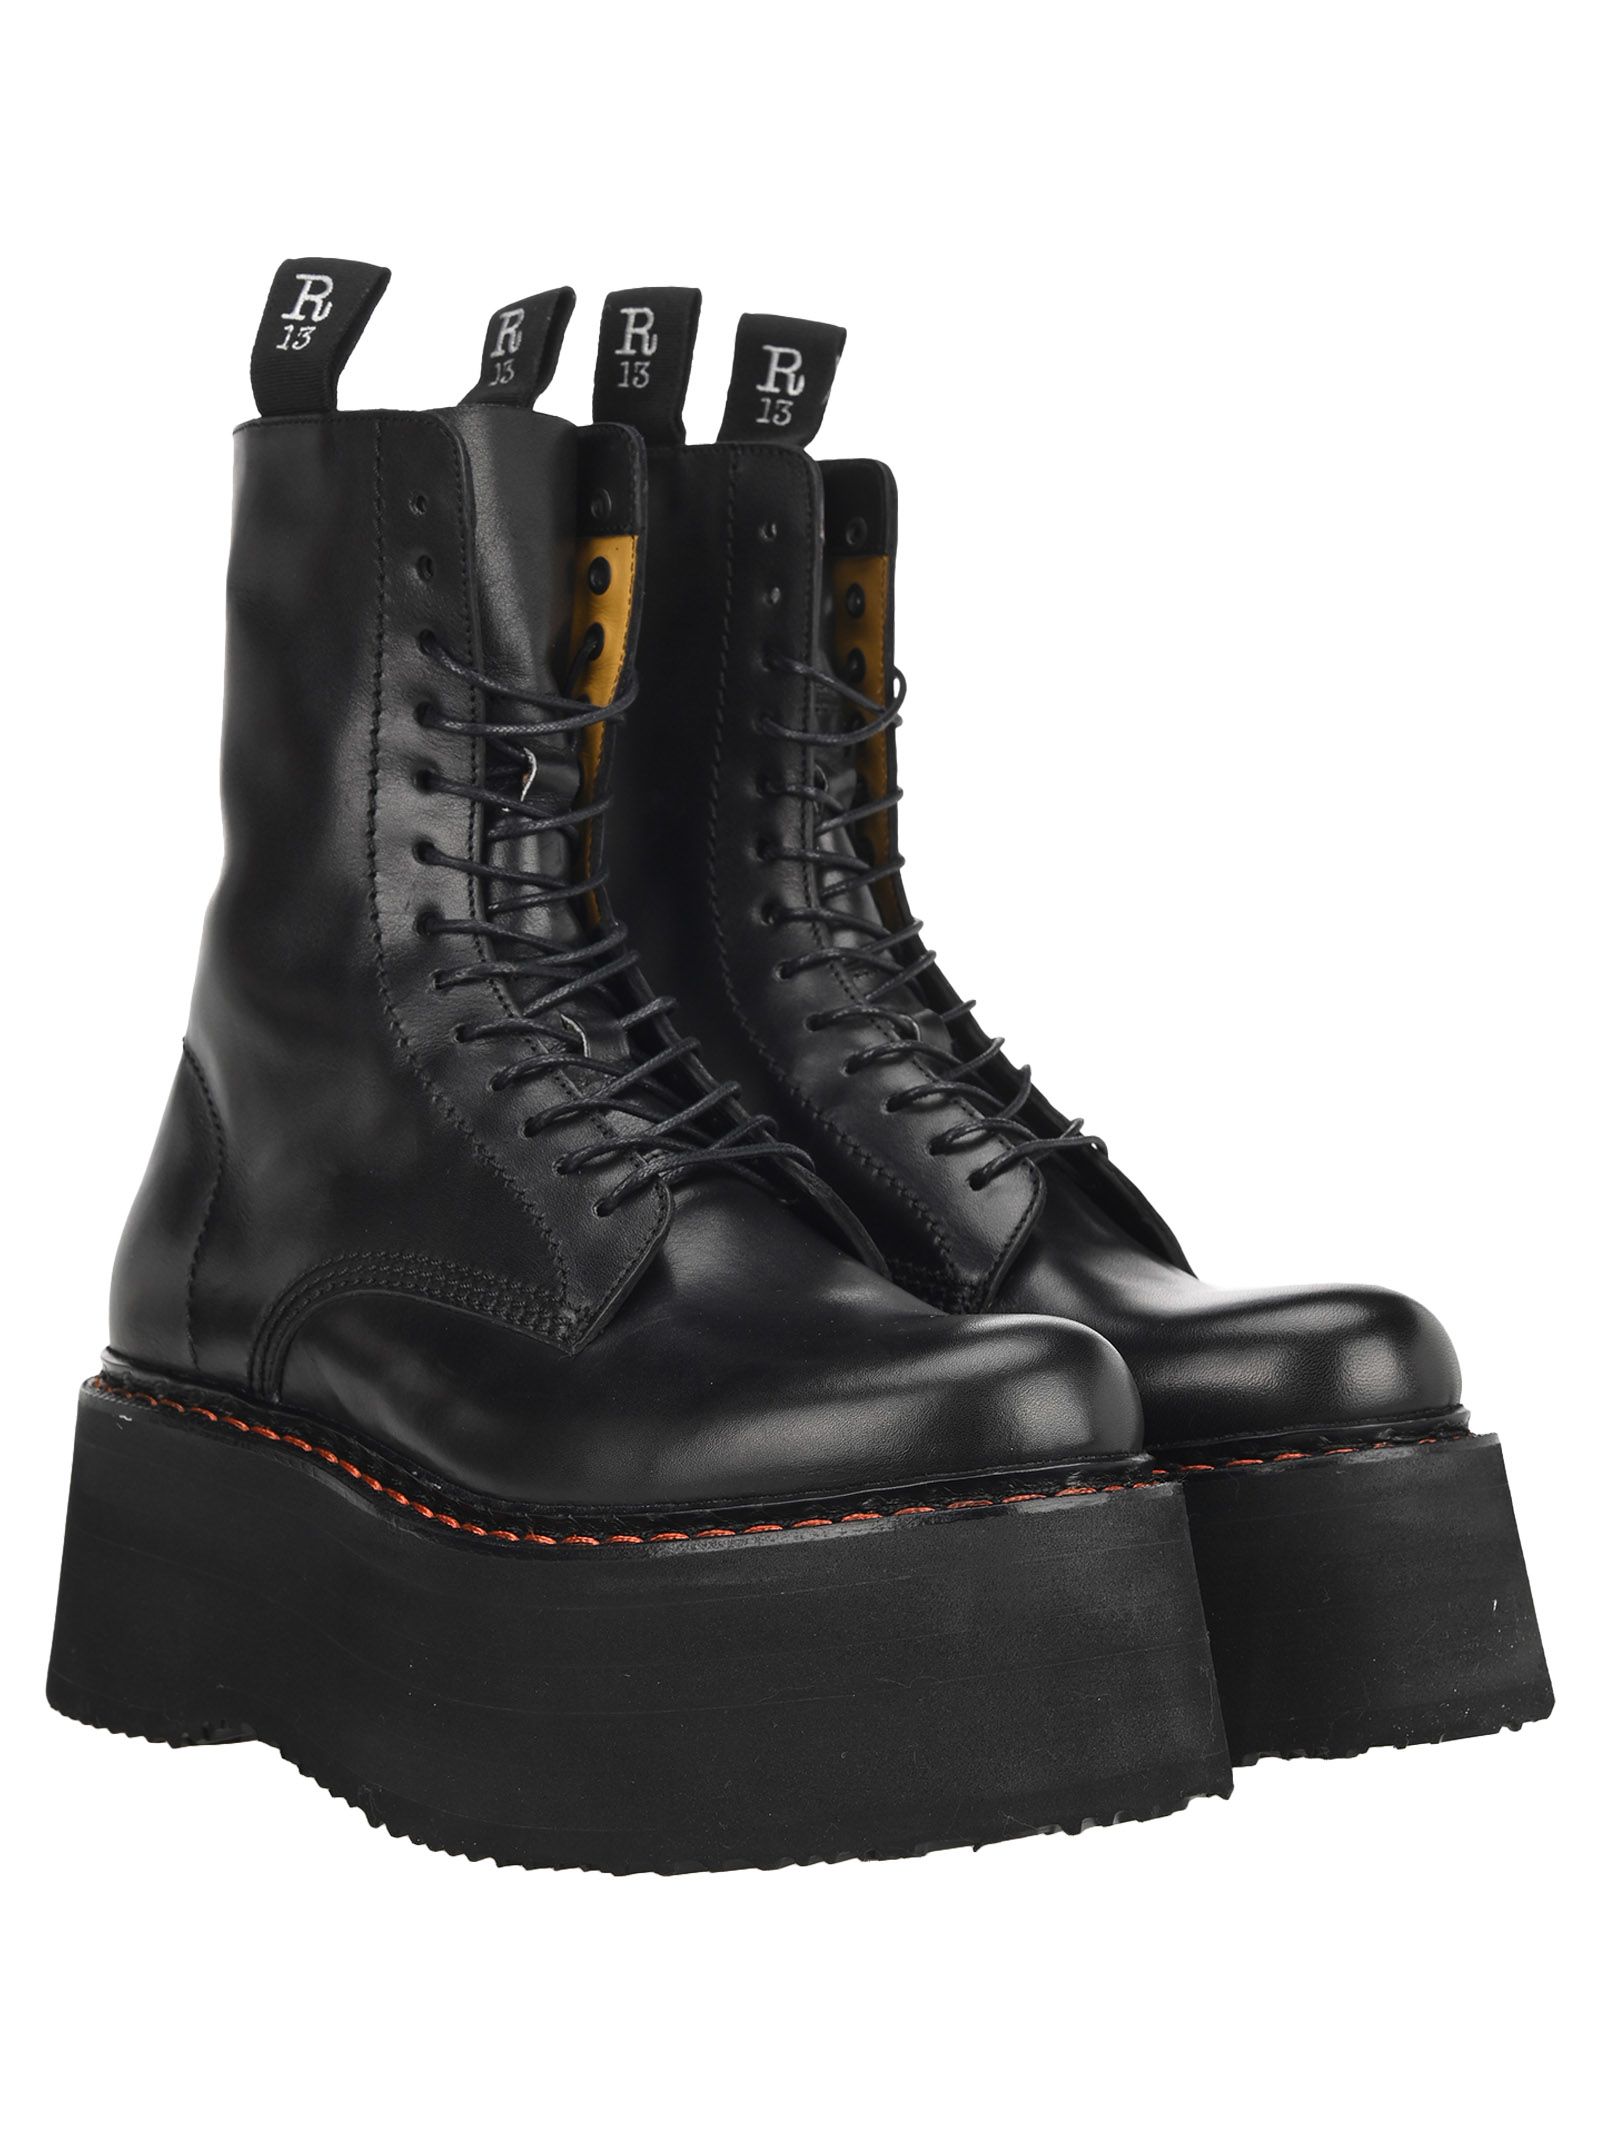 R13 Boots | italist, ALWAYS LIKE A SALE